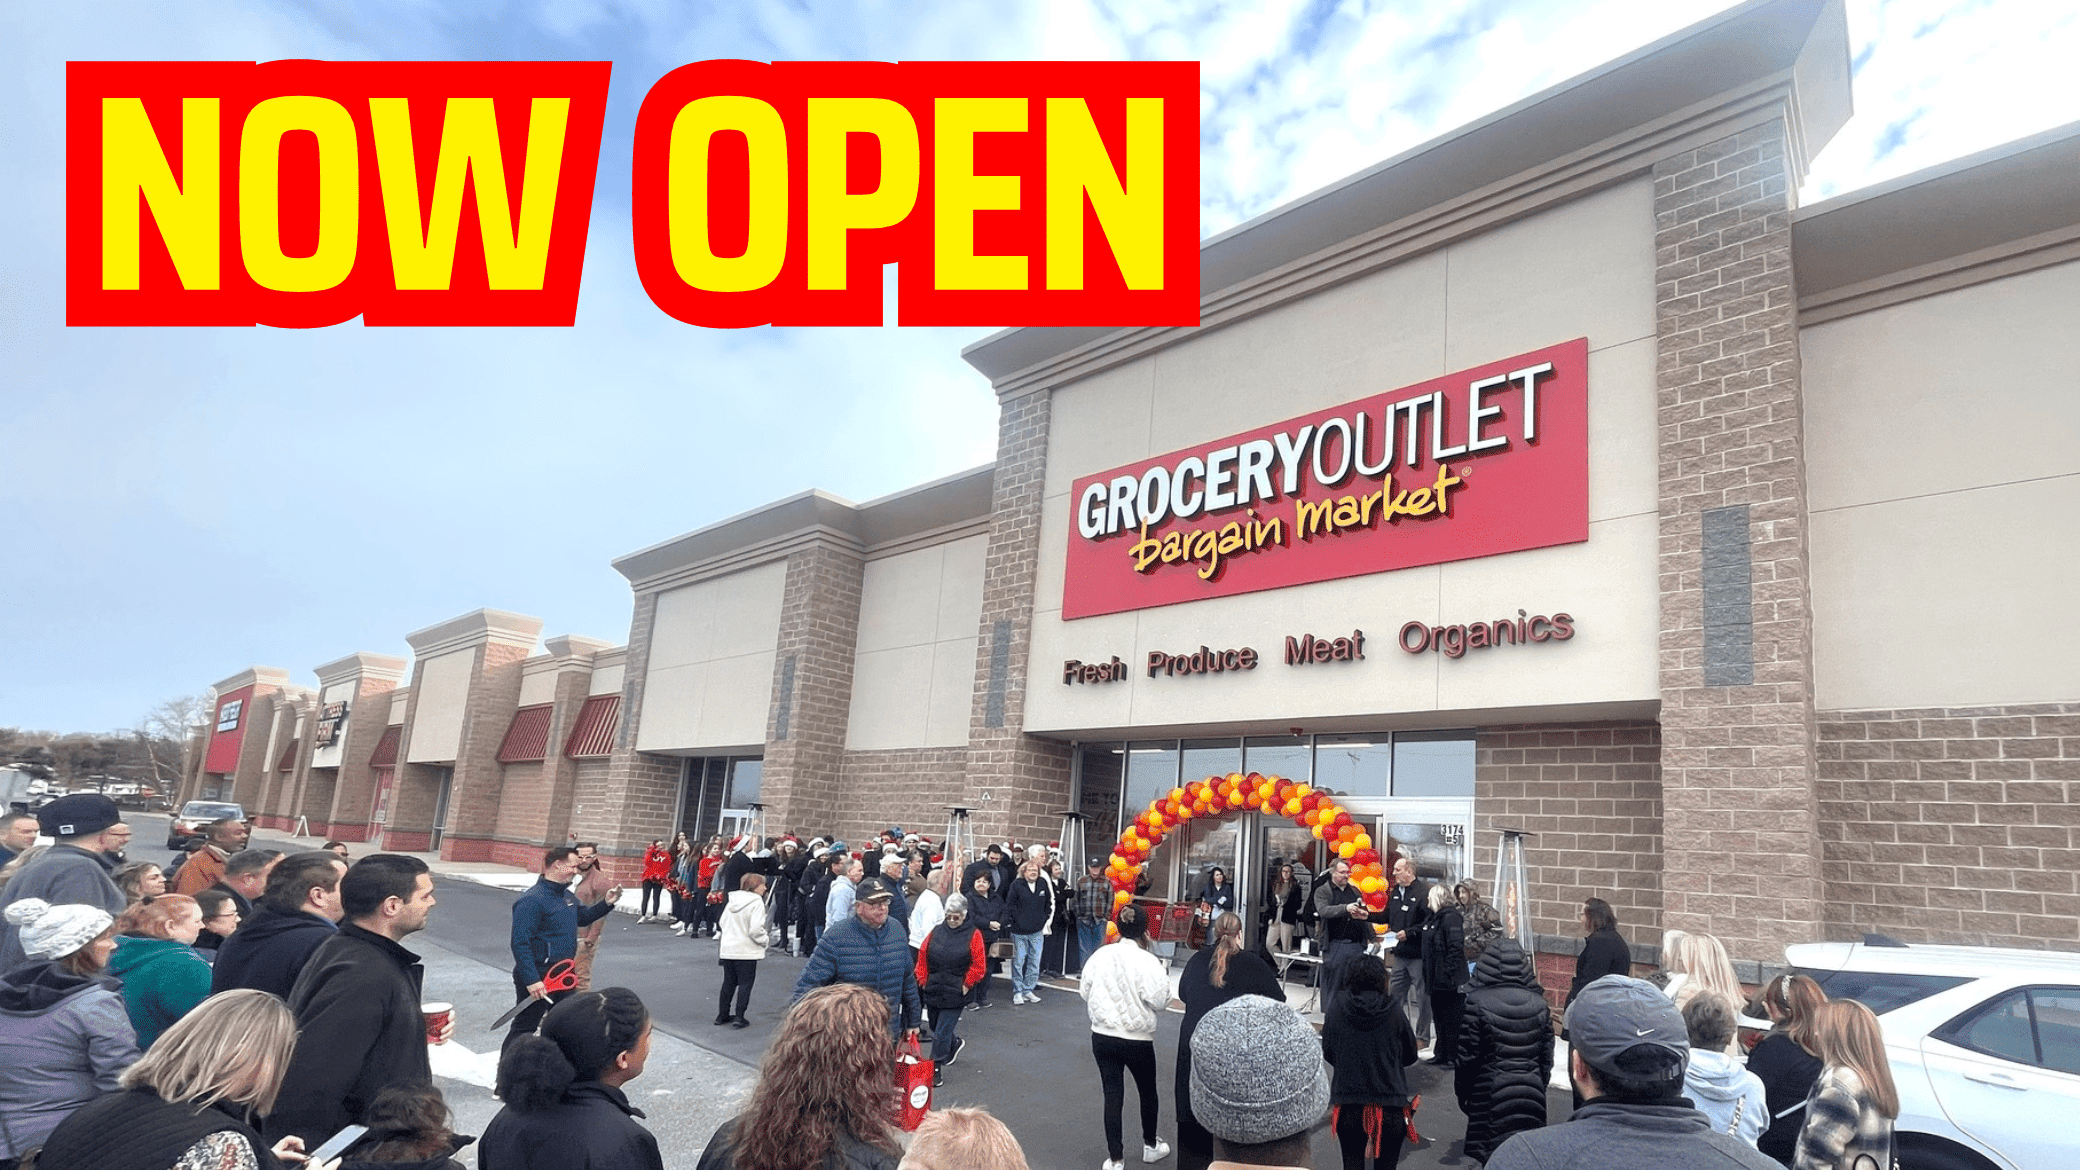 Grocery Outlet Now Open in Rio Grande